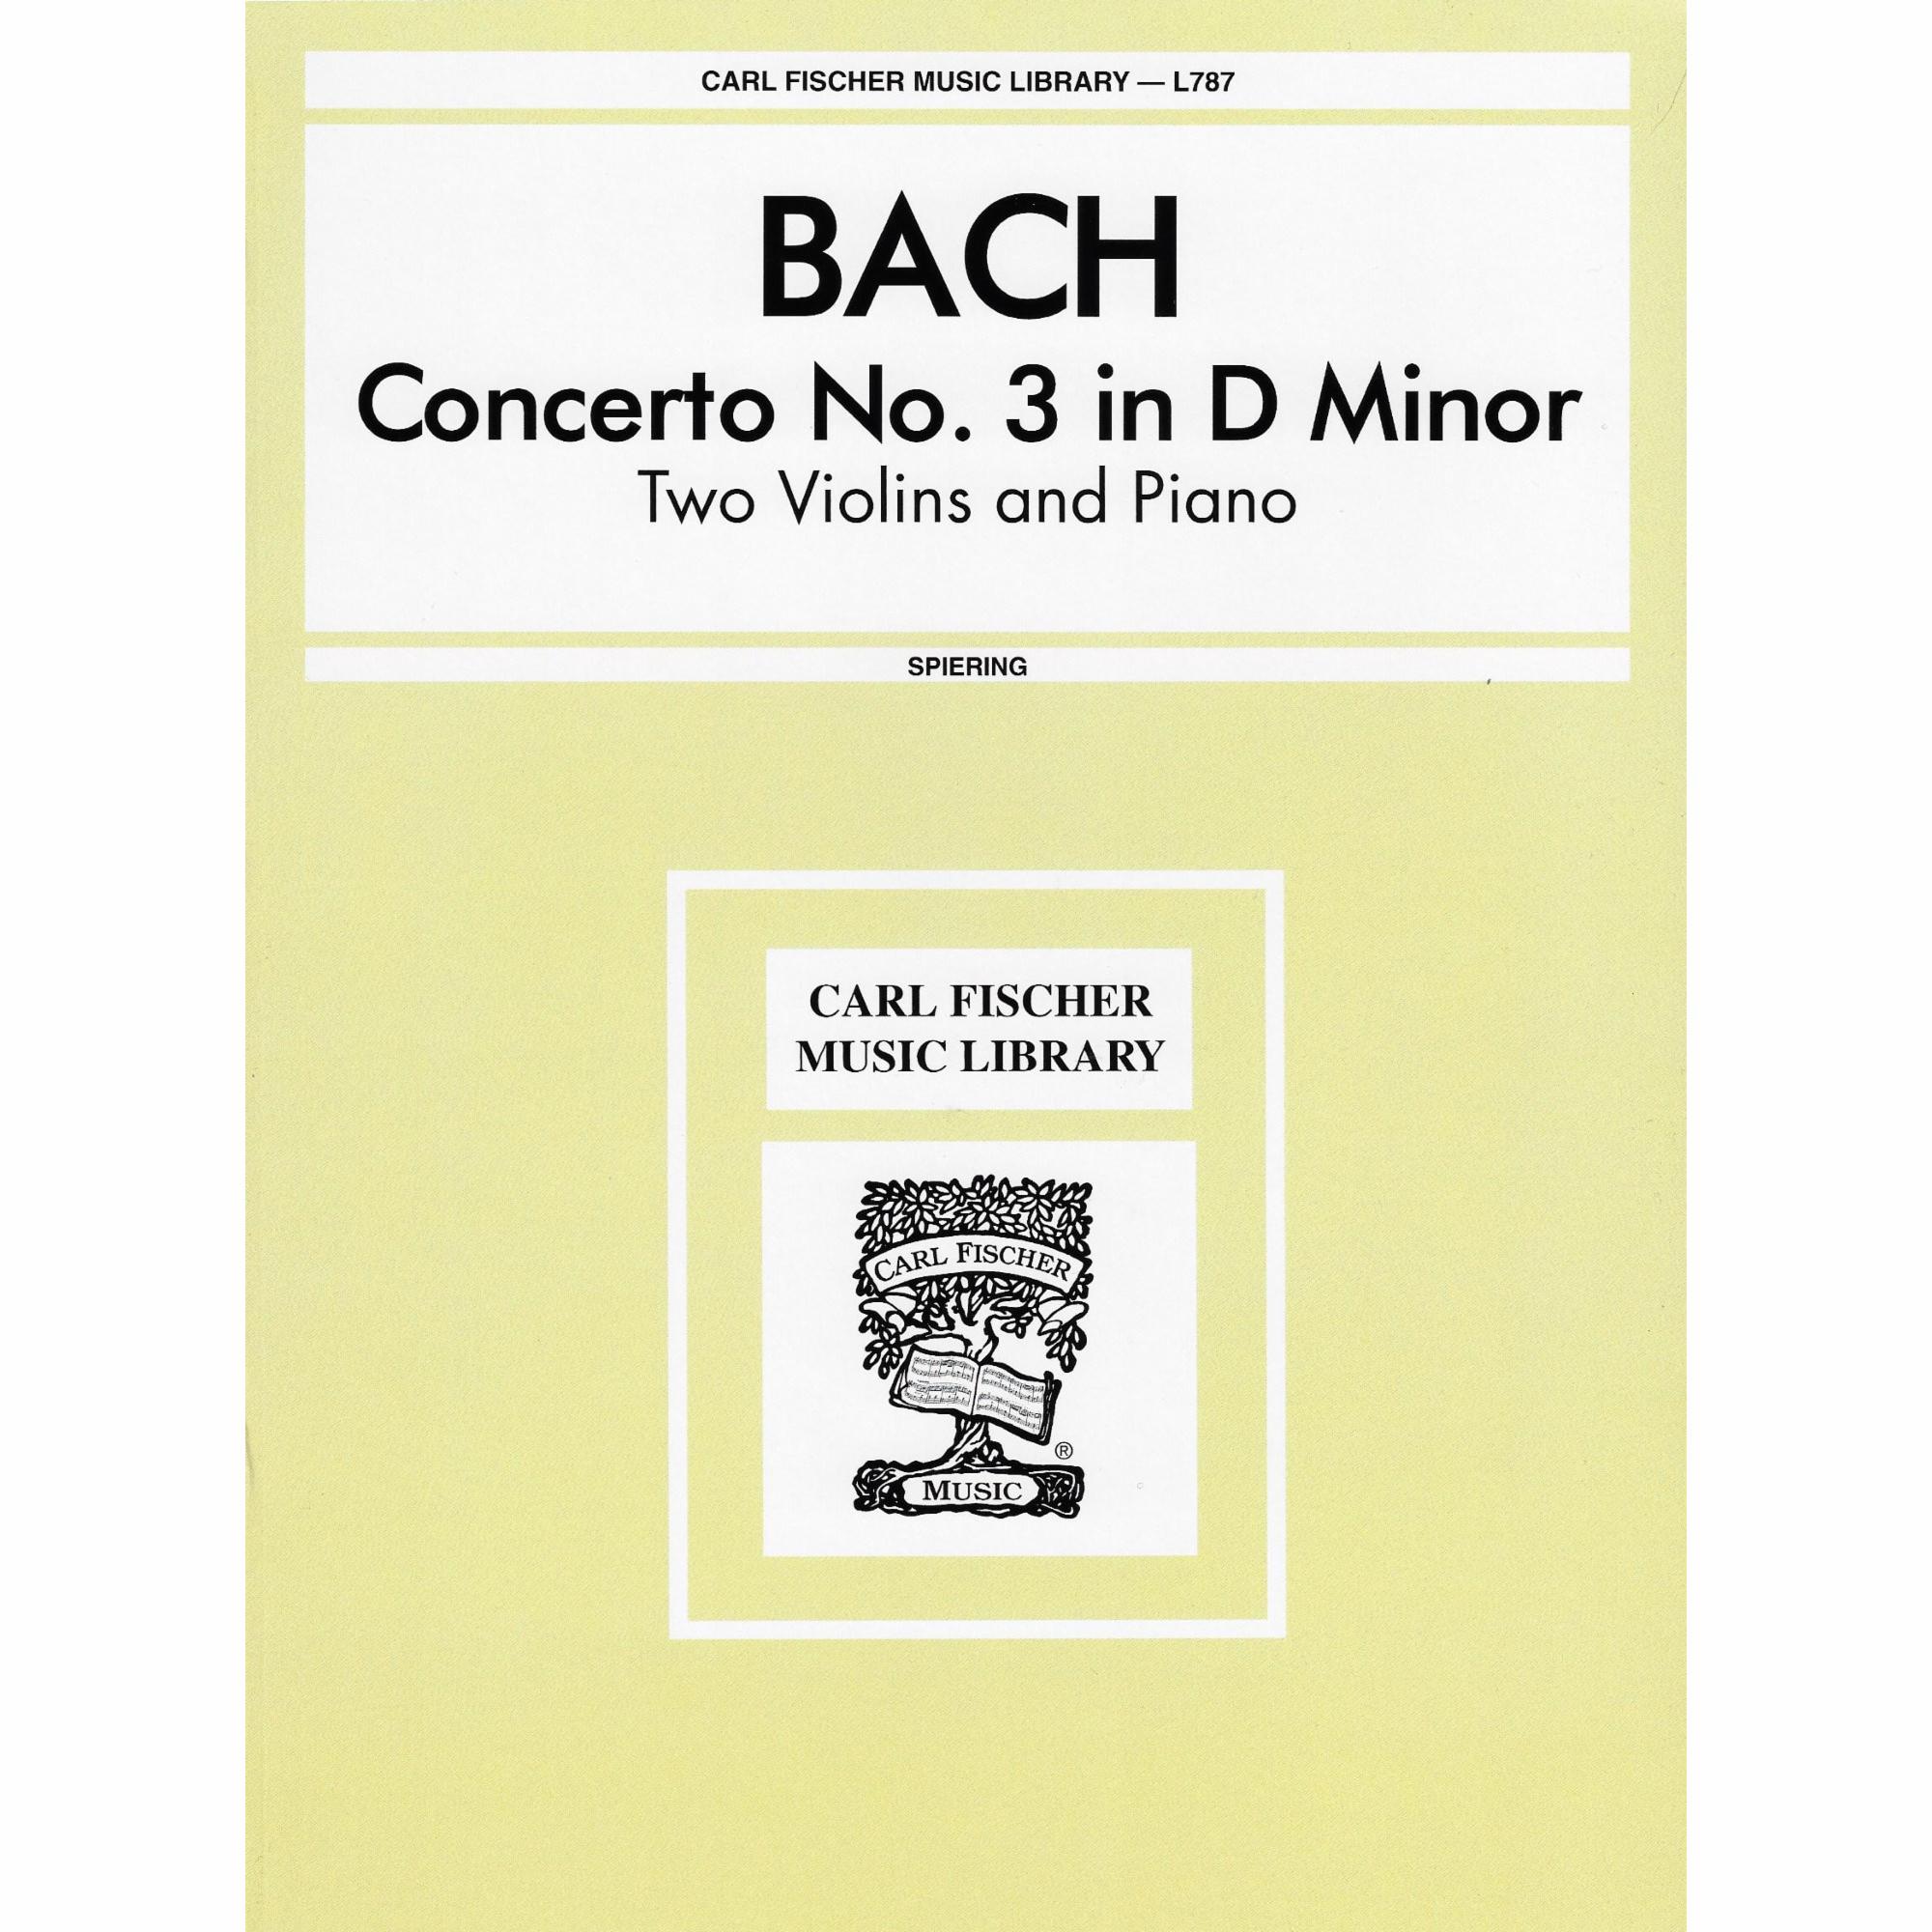 Bach -- Concerto No. 3 in D Minor for Two Violins and Piano